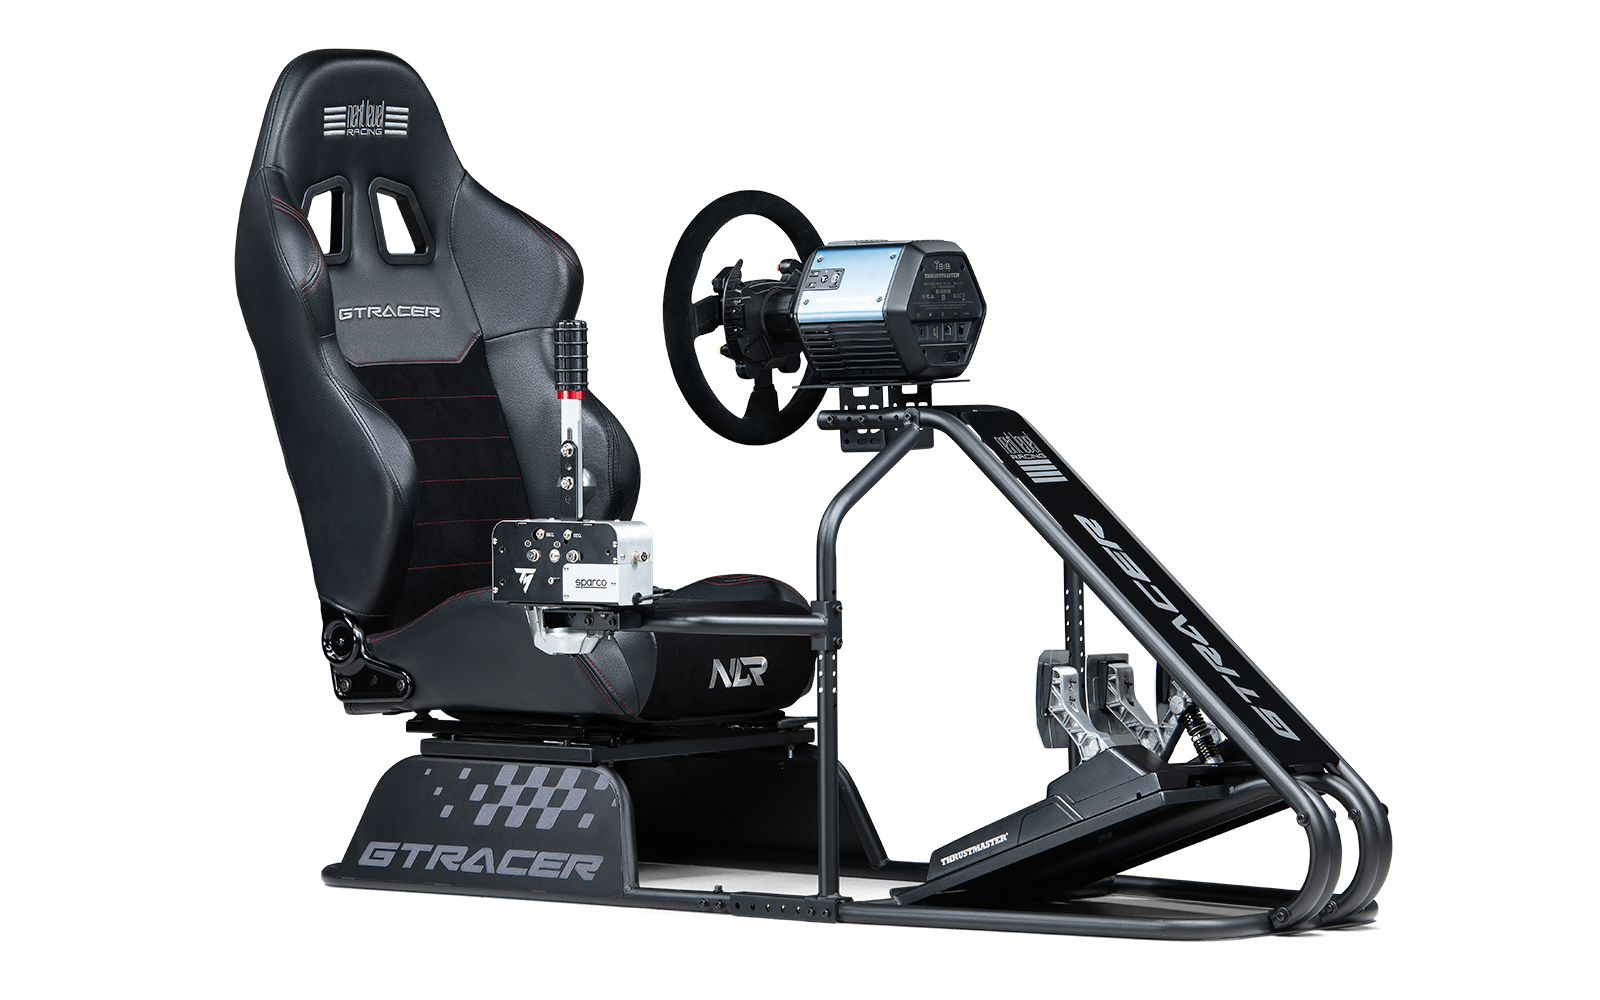 Next Level Racing GTRacer cockpit is a budget banger